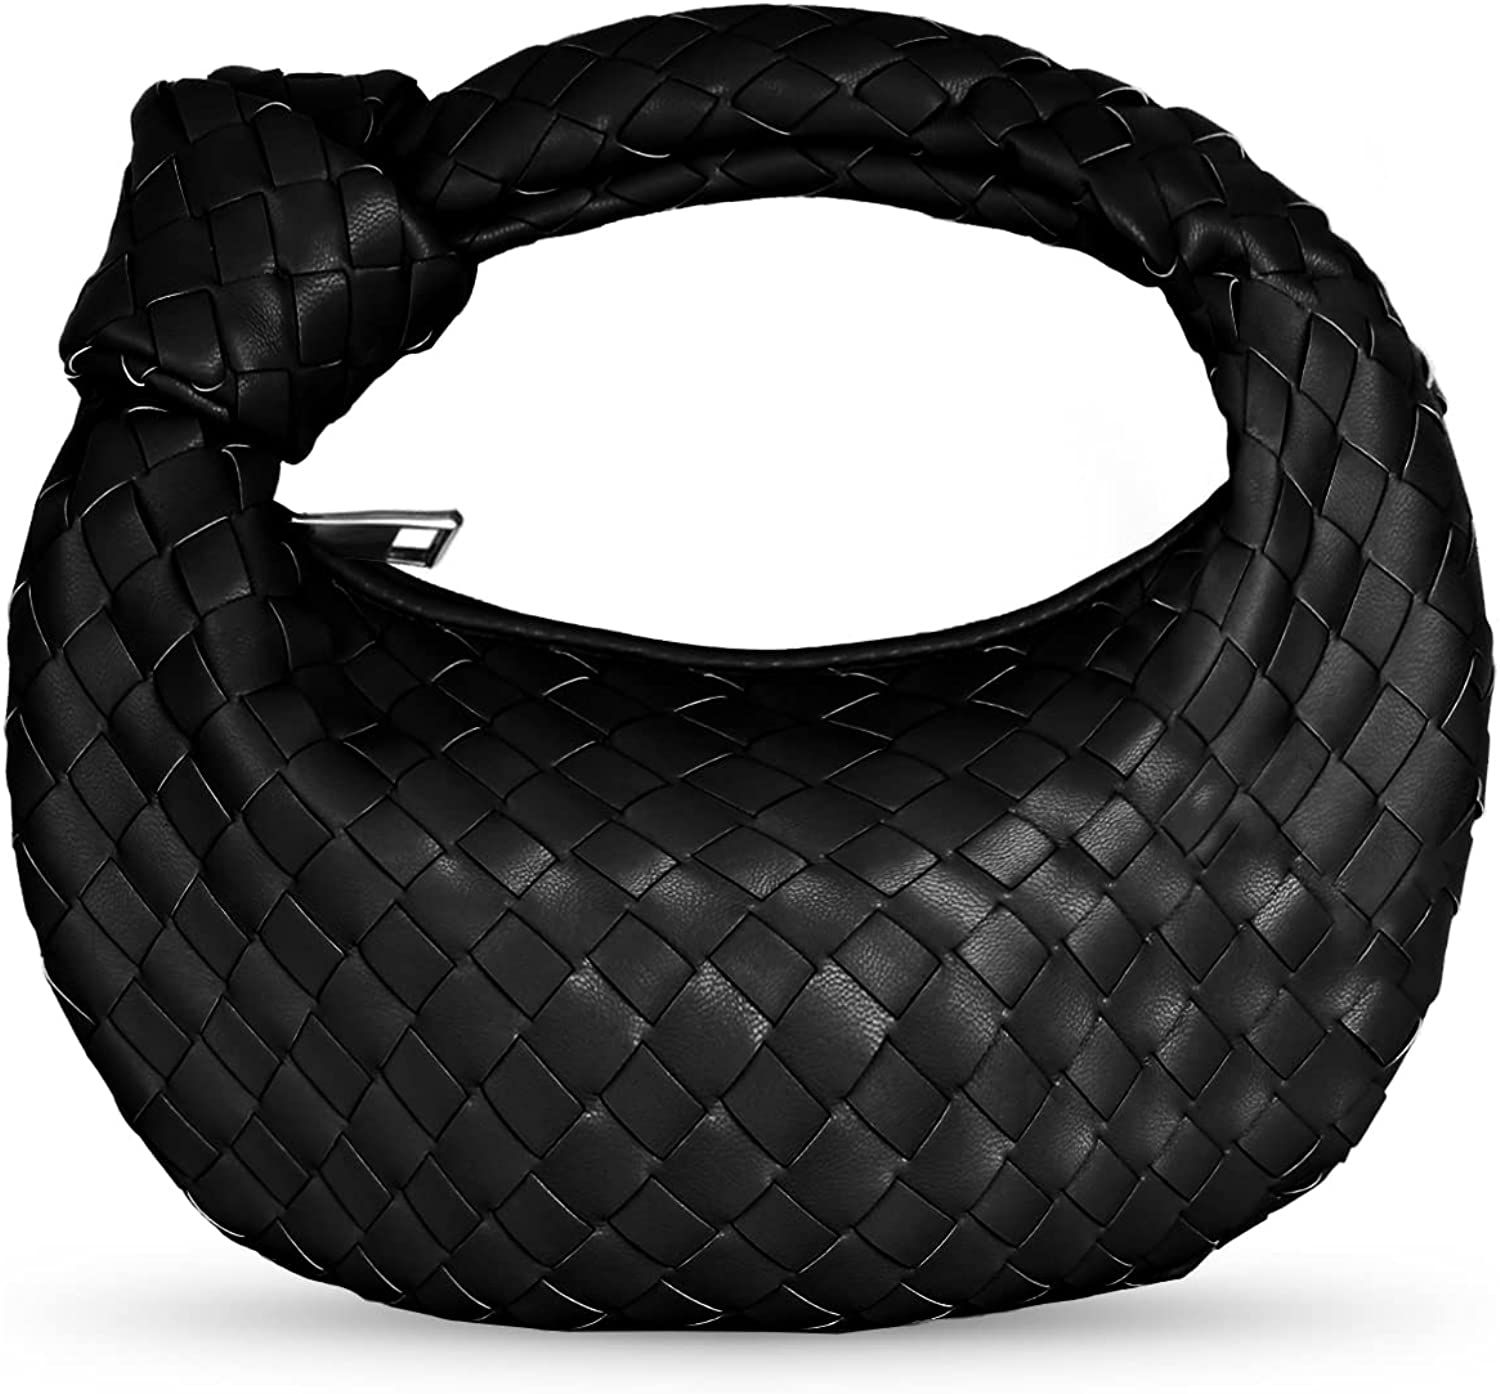 JBB Women Woven Hobo Handbags Leather Shoulder Bags Knotted Clutch Purse Small Tote Bags | Amazon (US)